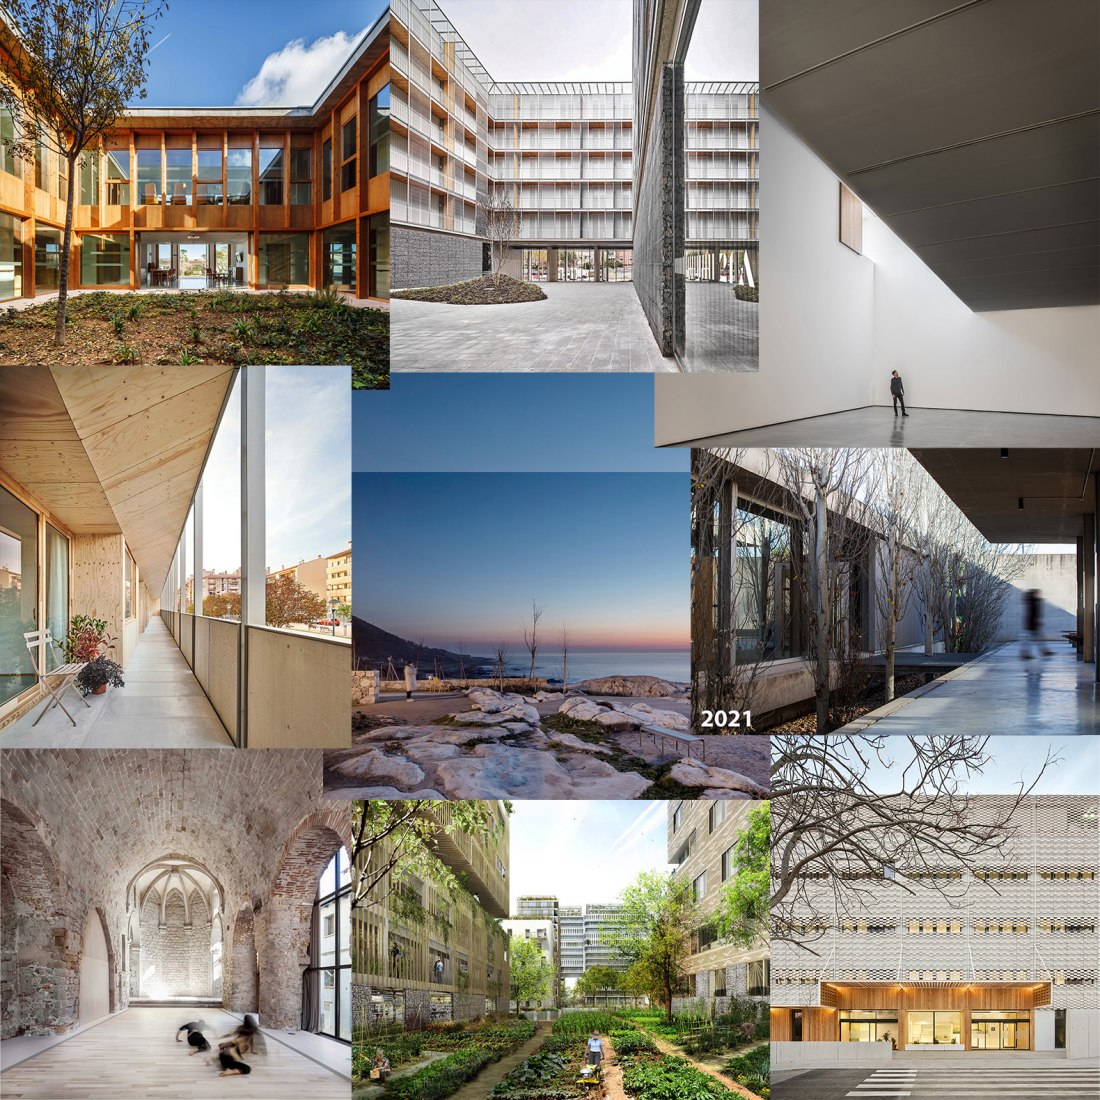 CSCAE ARCHITECTURE Awards recognize the best of architecture and urban planning